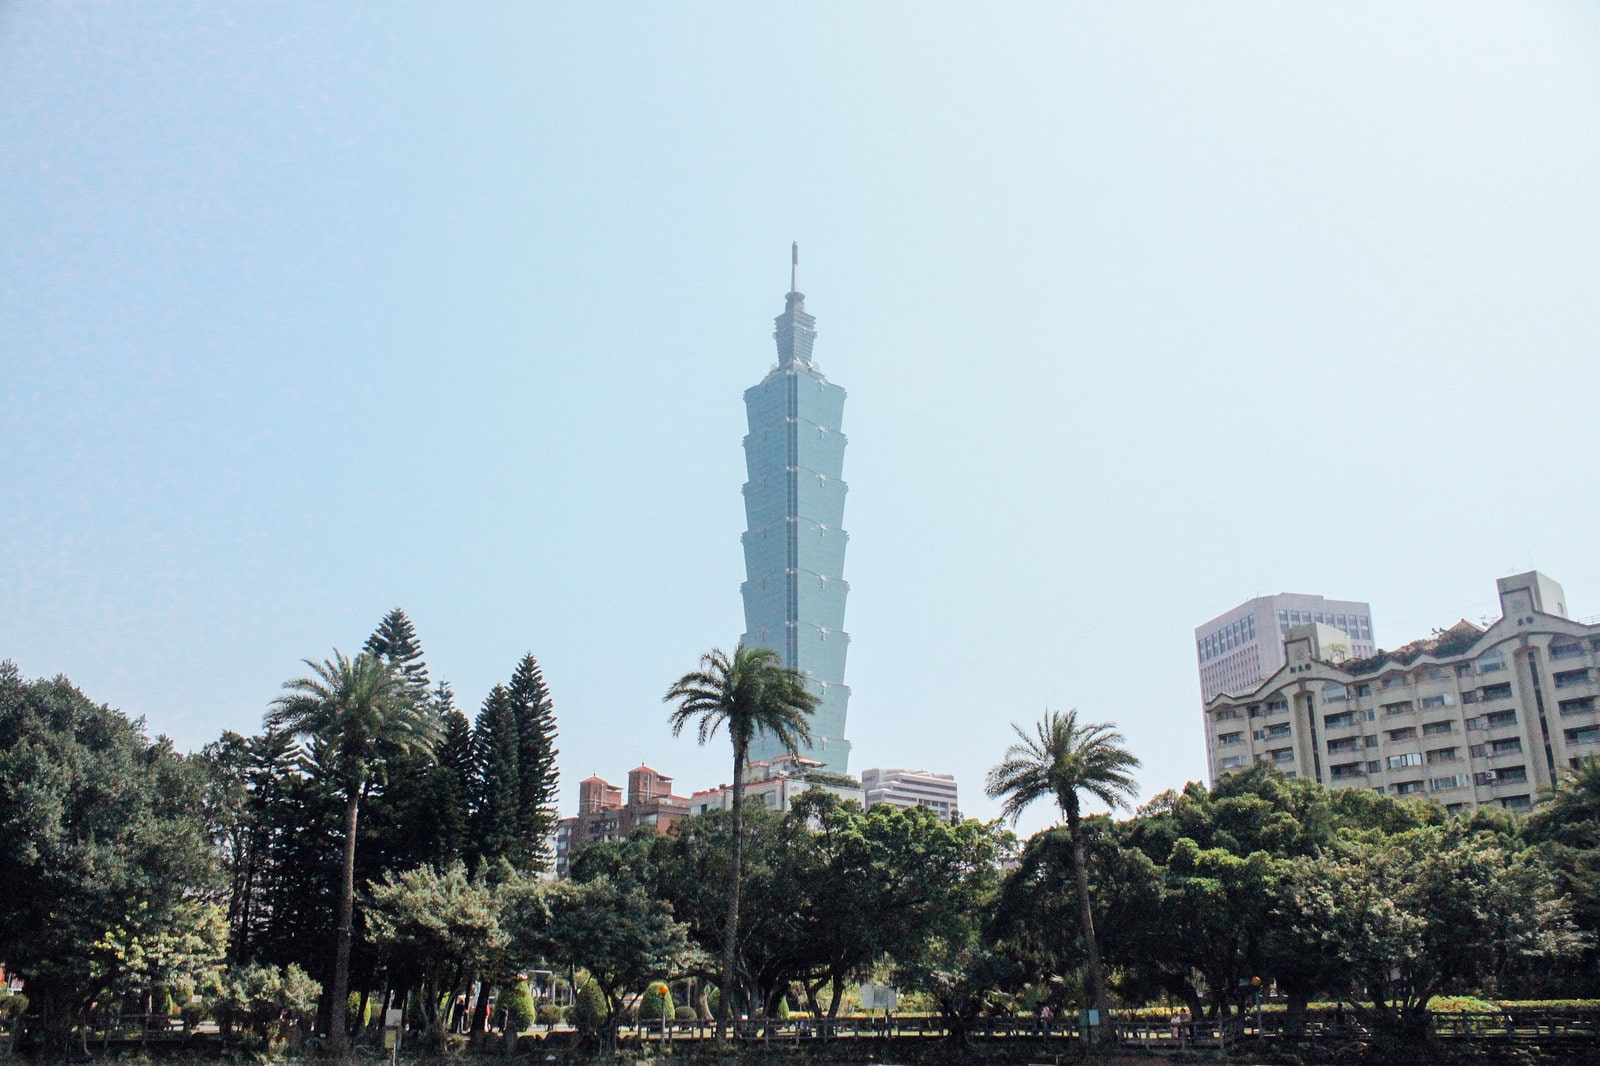 Where to stay in Taipei? – Seven Best Spots For Lodging